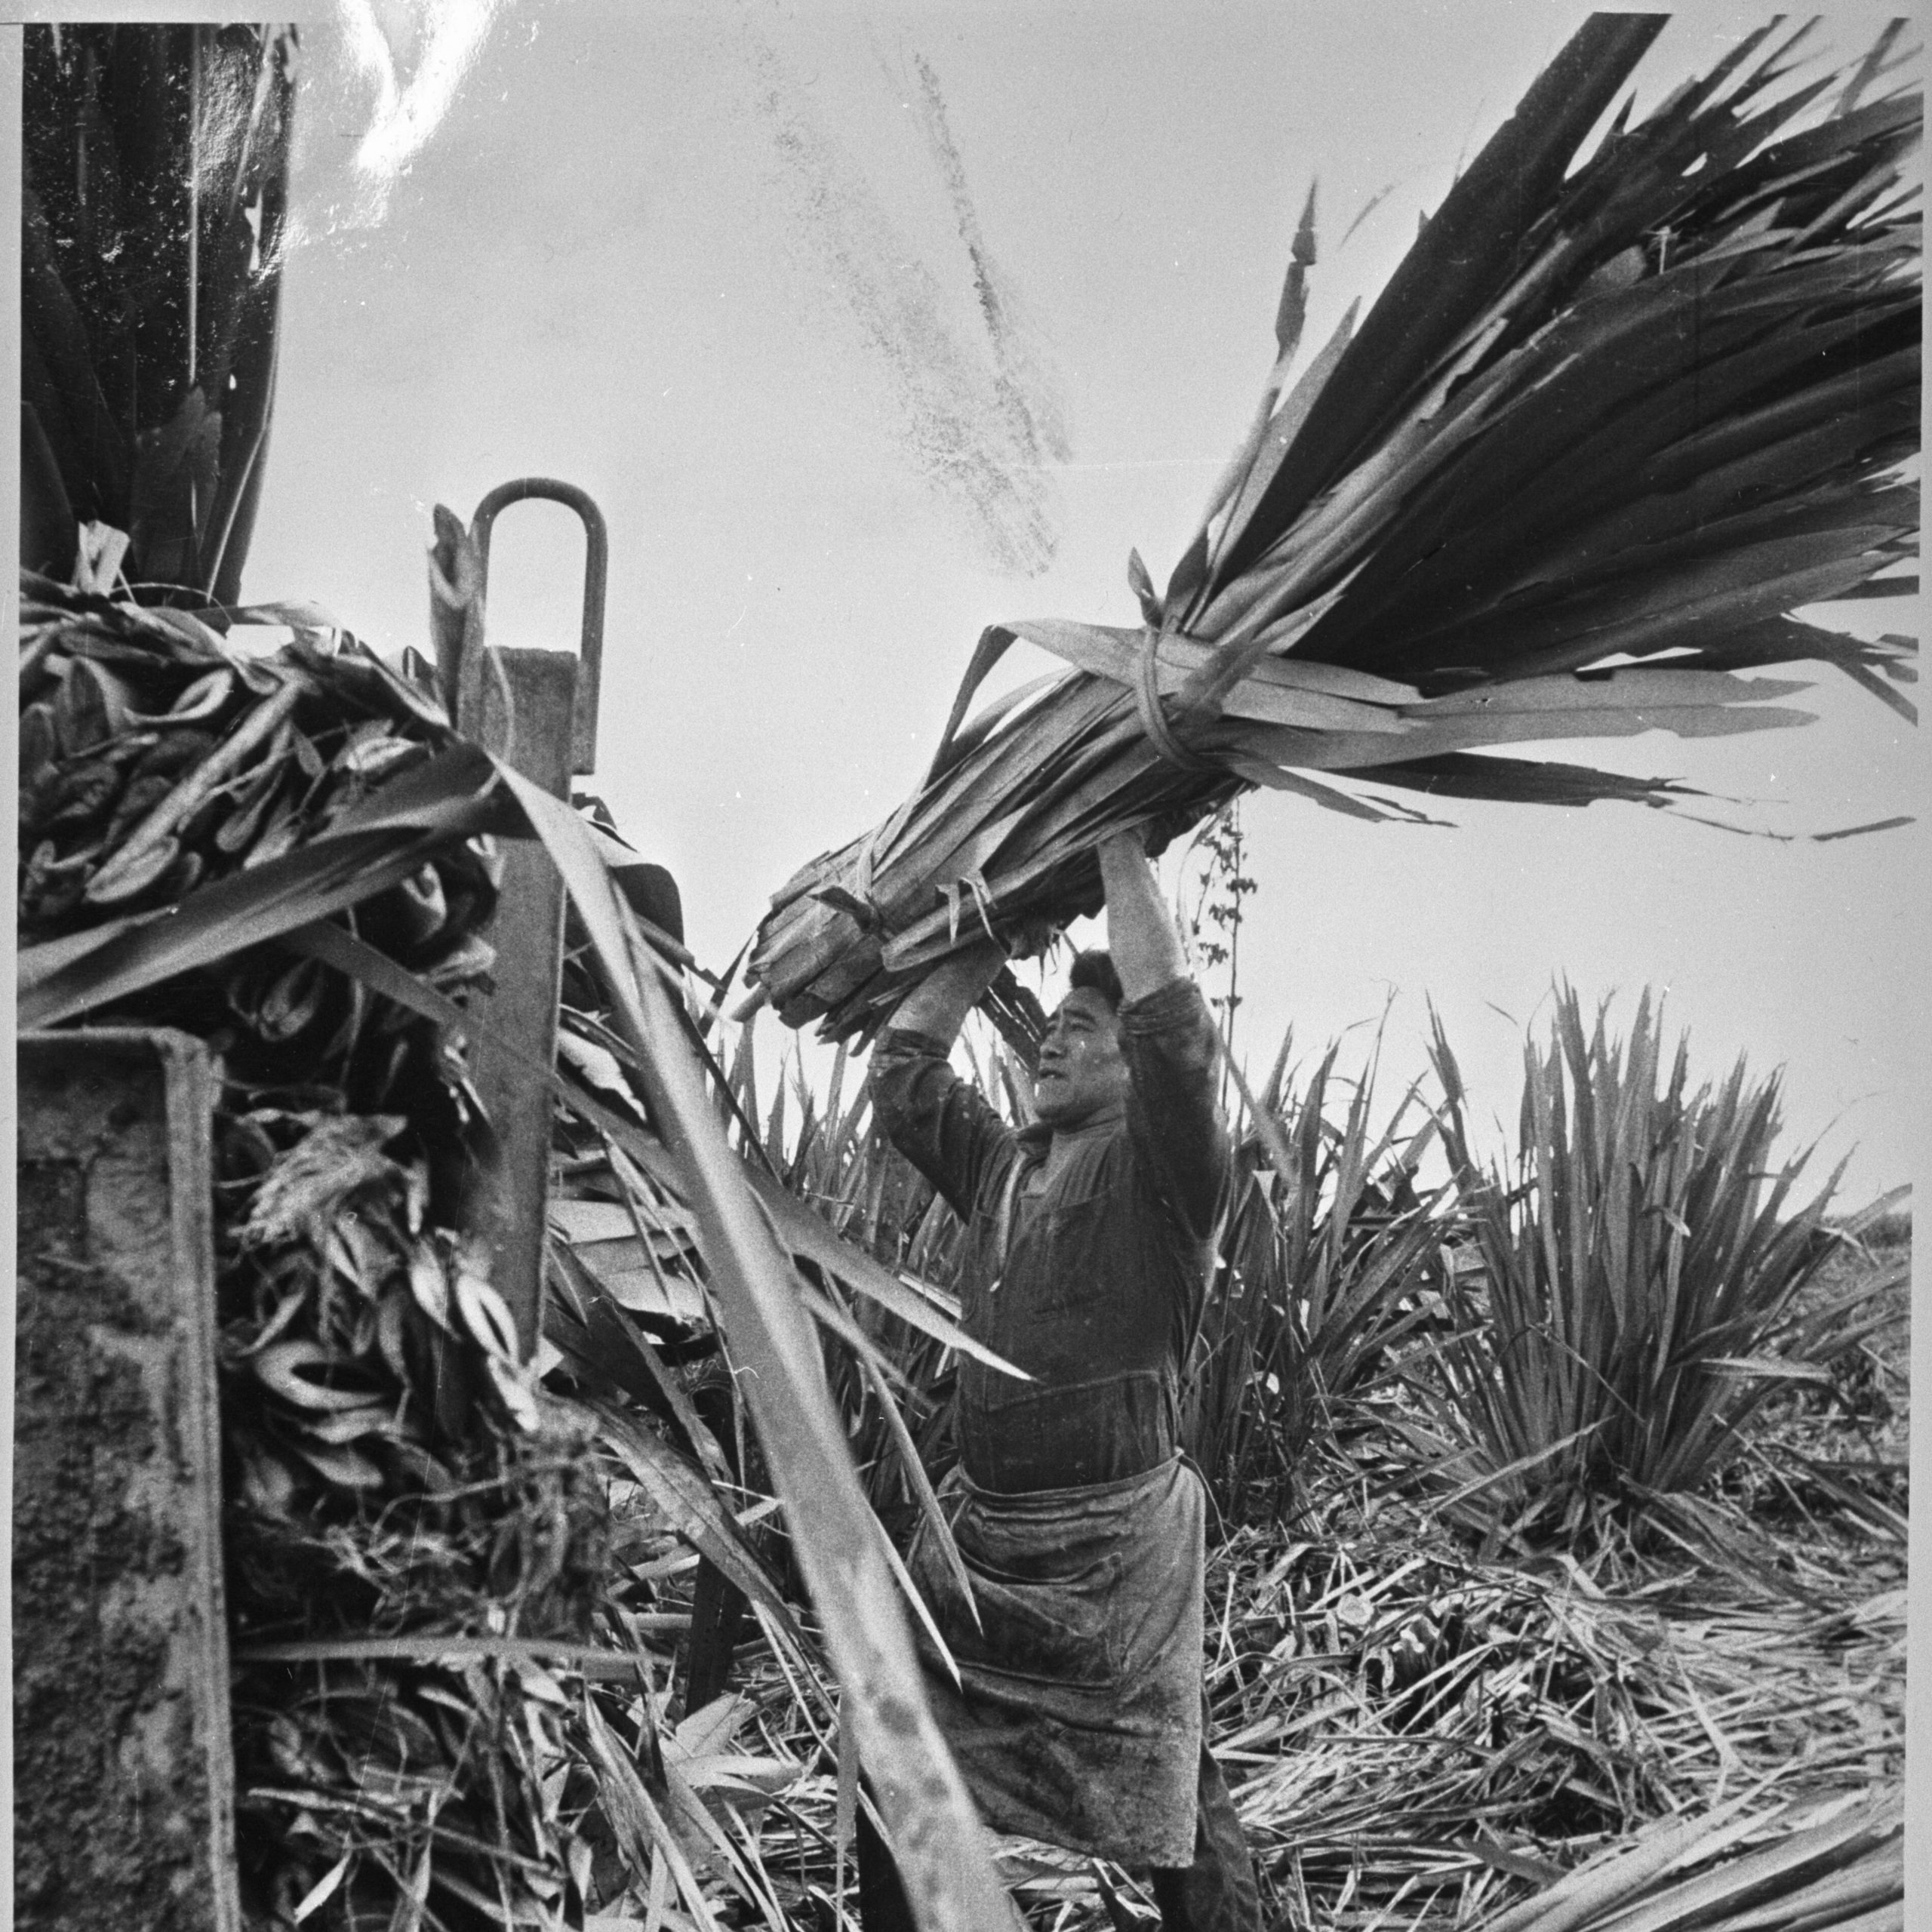 Image depicts manual labourer with apron tied around waist, arms raised as they lift a tied bundle of long flax leaves.